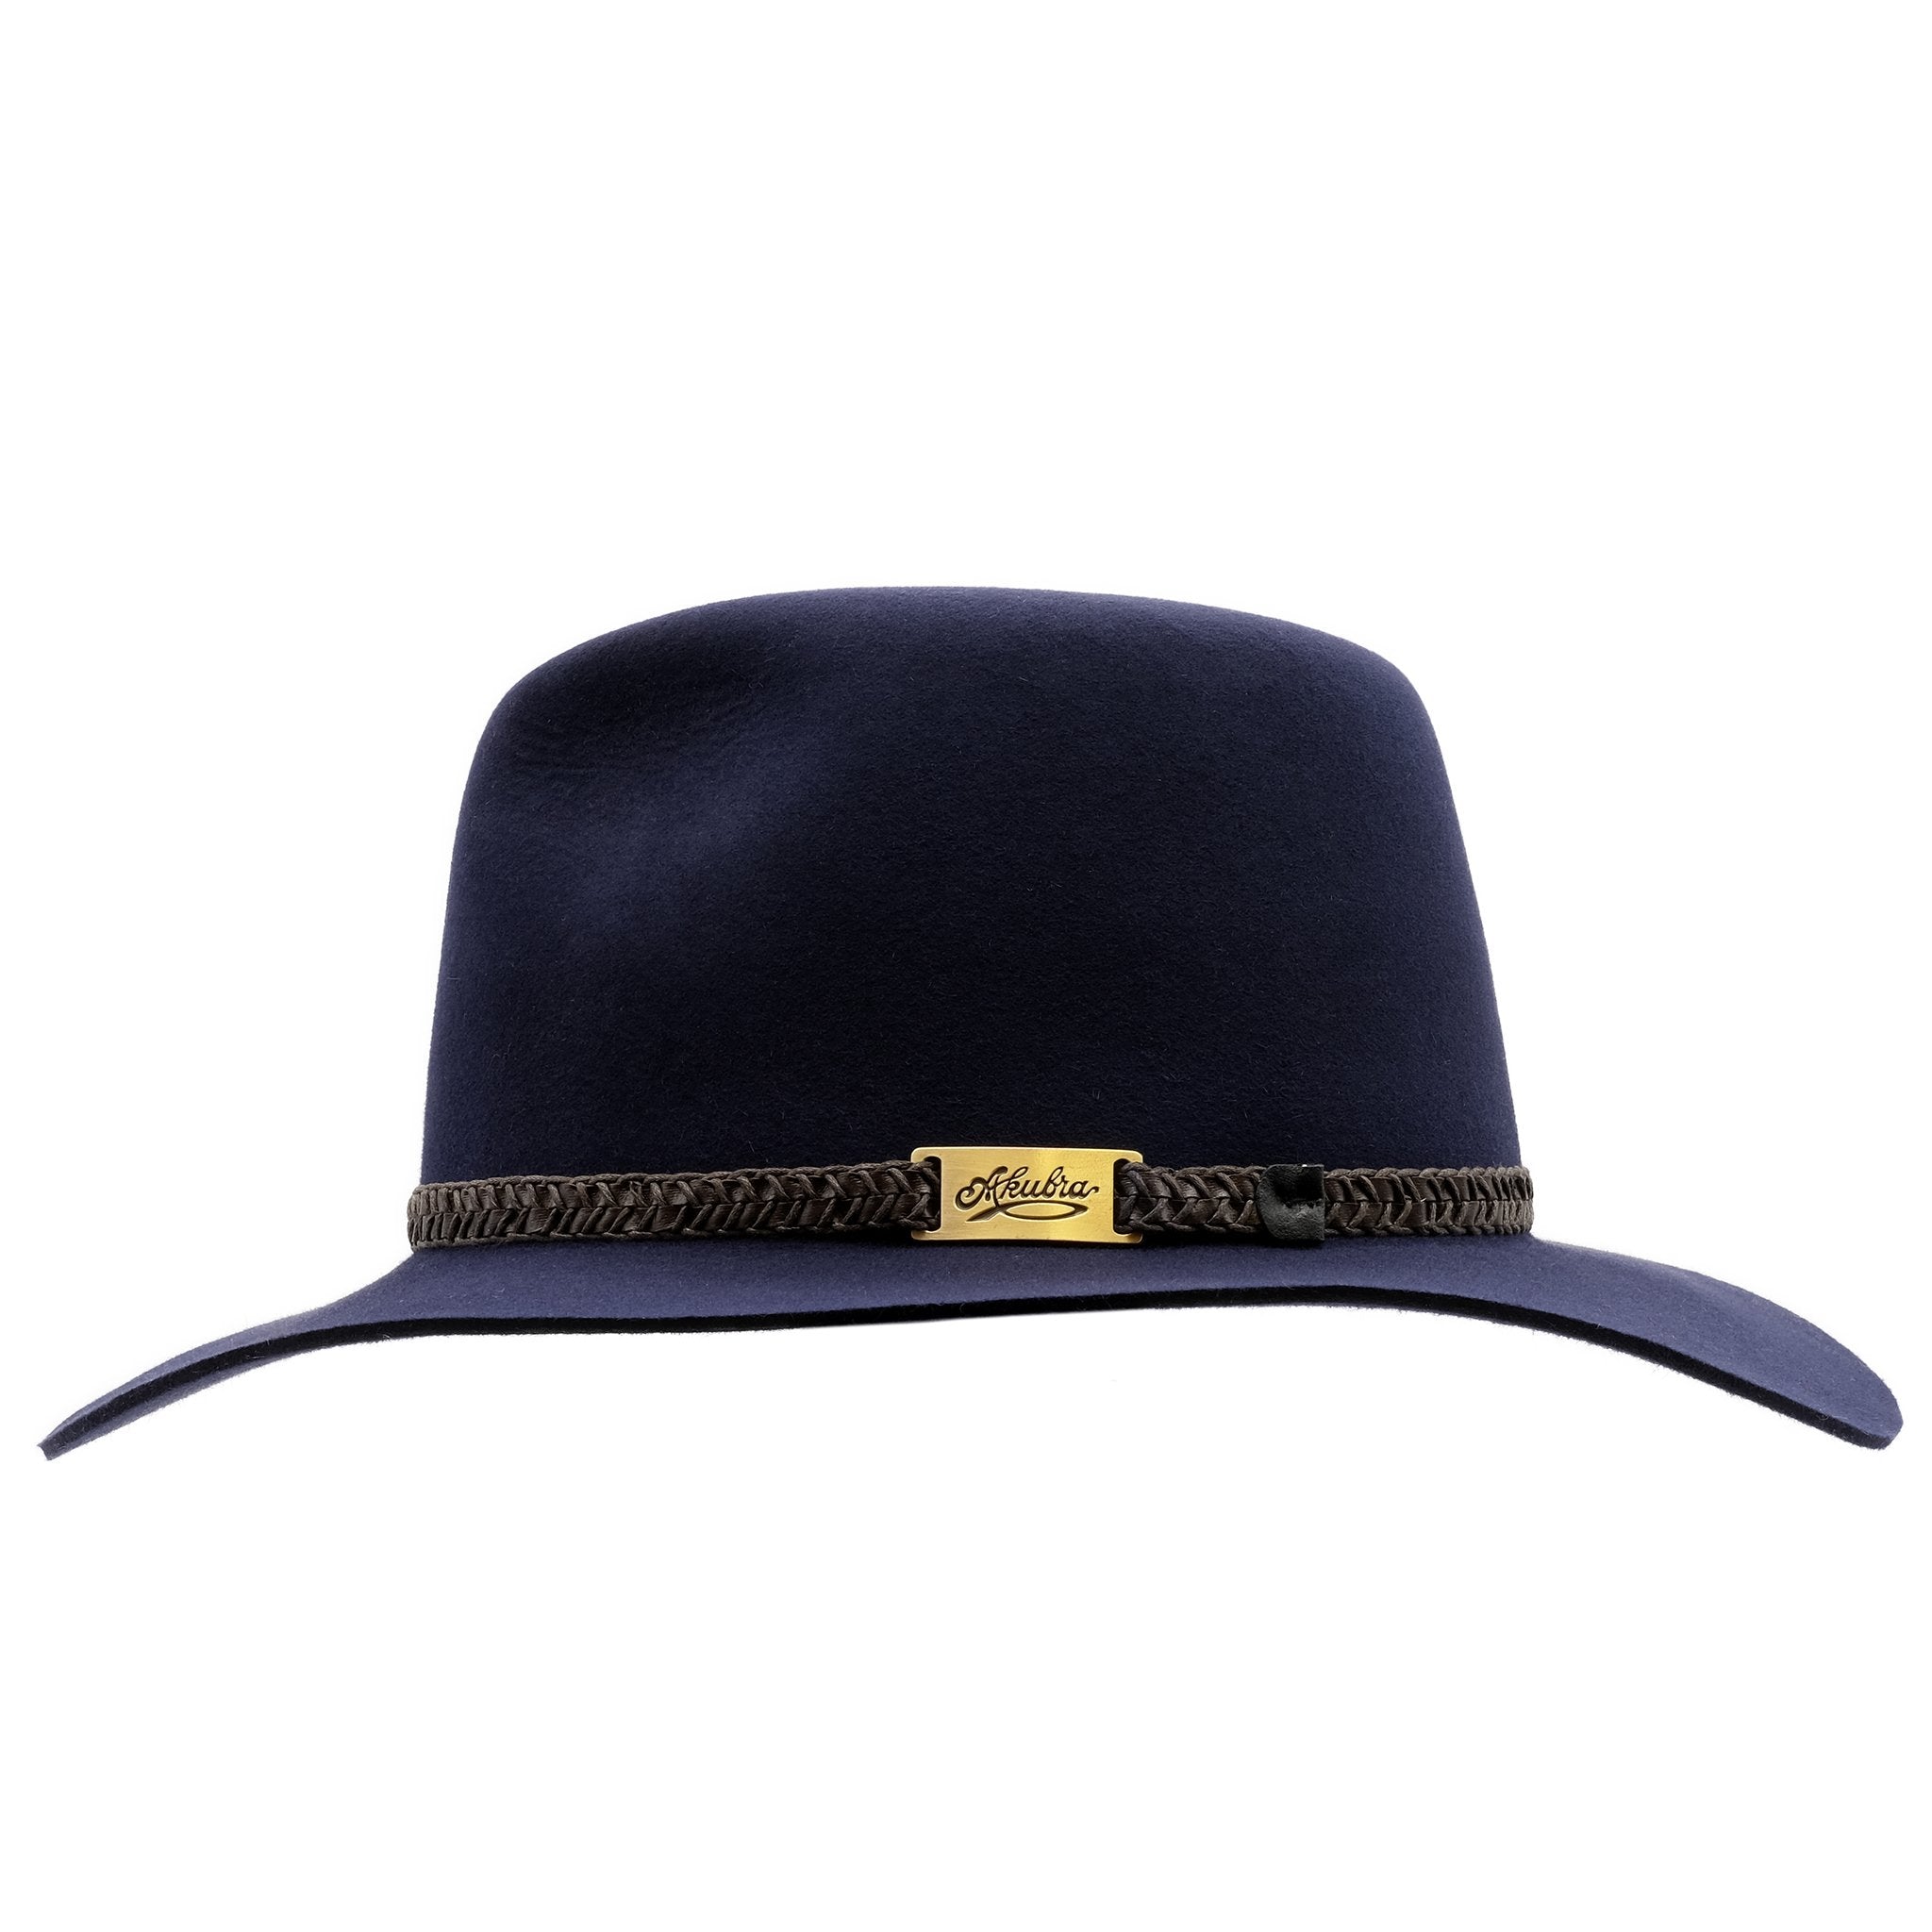 side view of the Akubra Avalon hat in Federation Navy colour